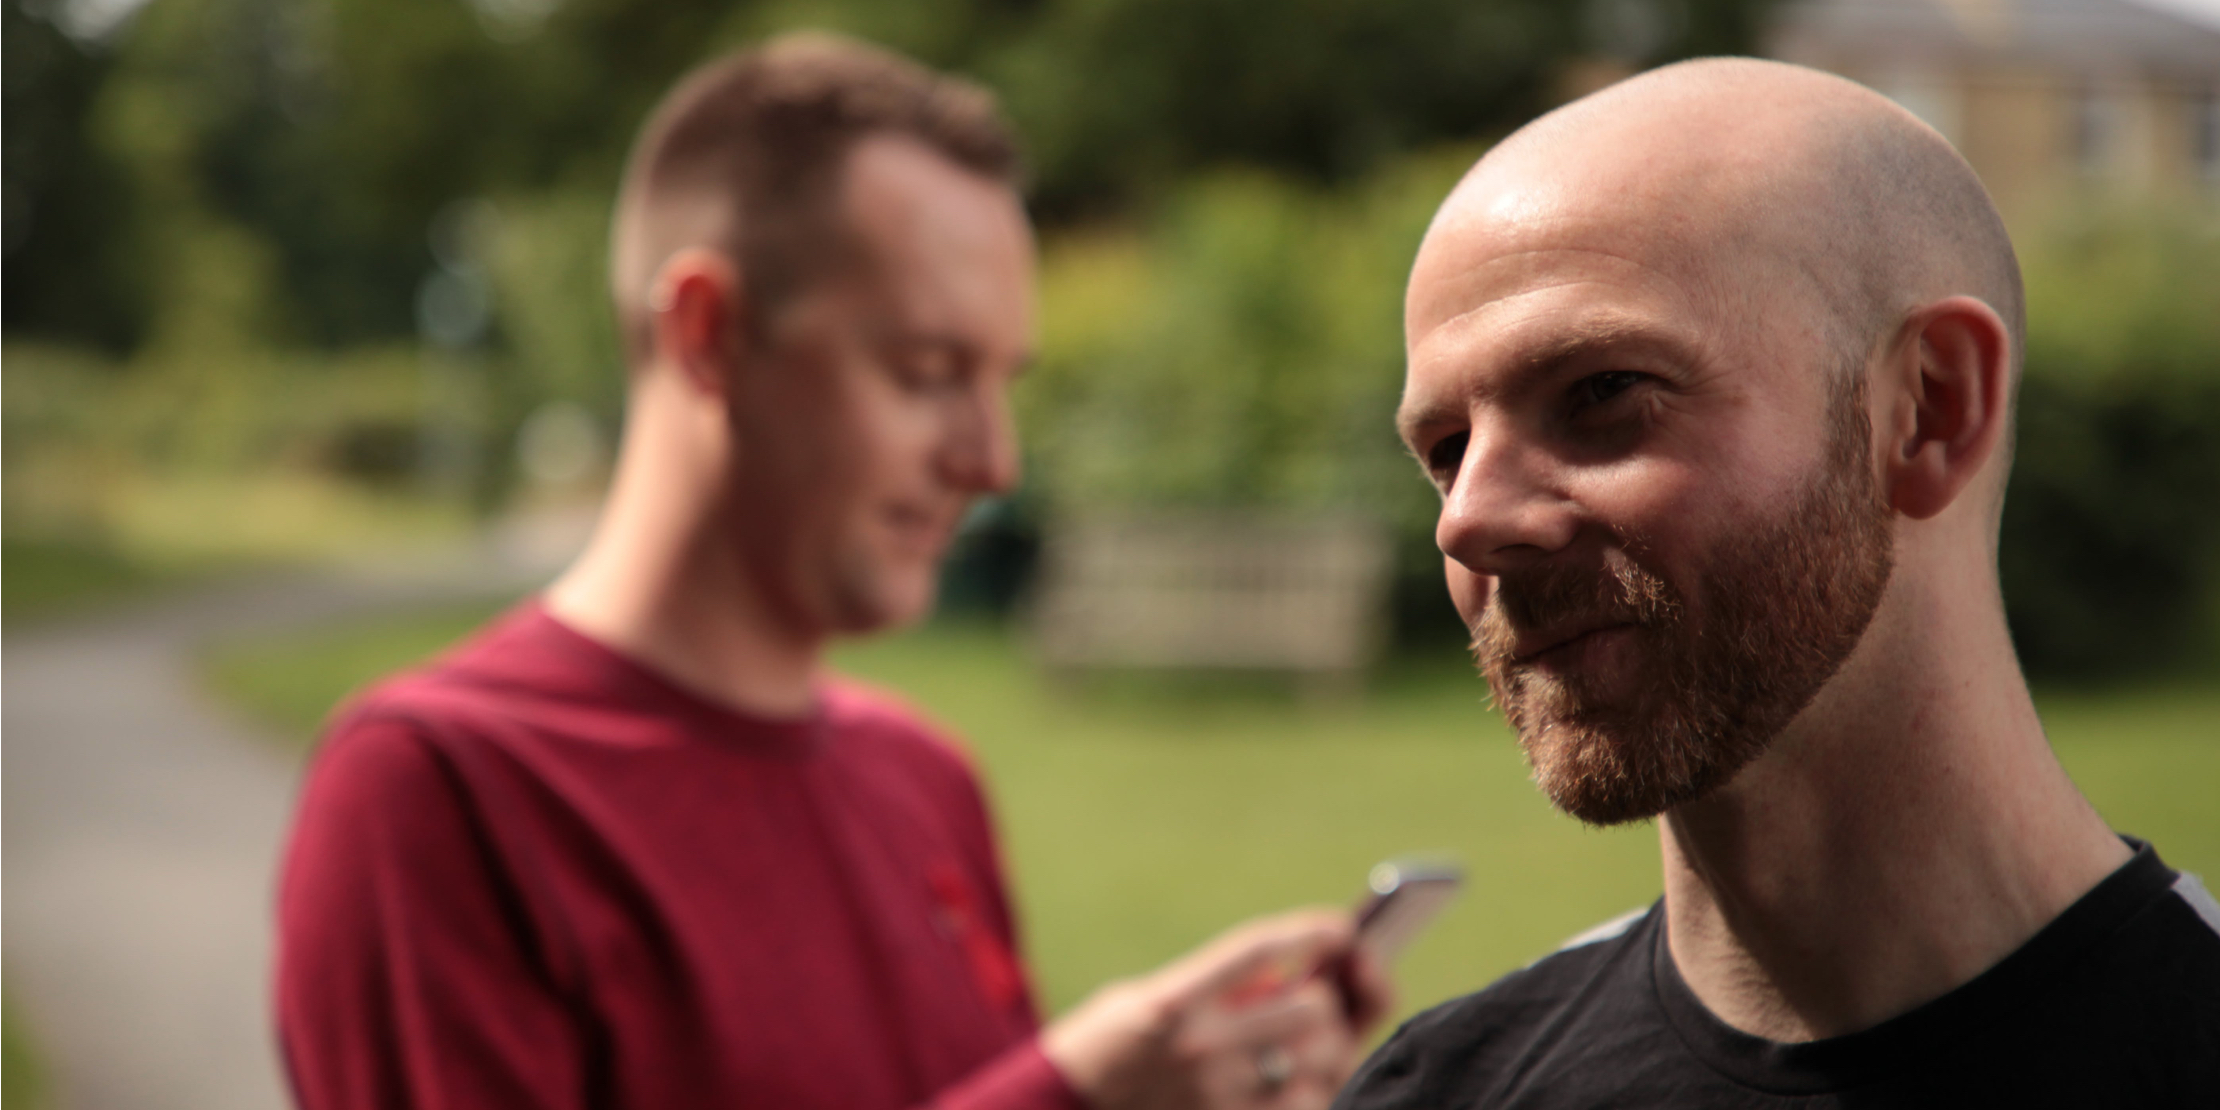 Two men outside; one (out of focus) looks at his phone, the other (in focus) in the foreground looks to the side